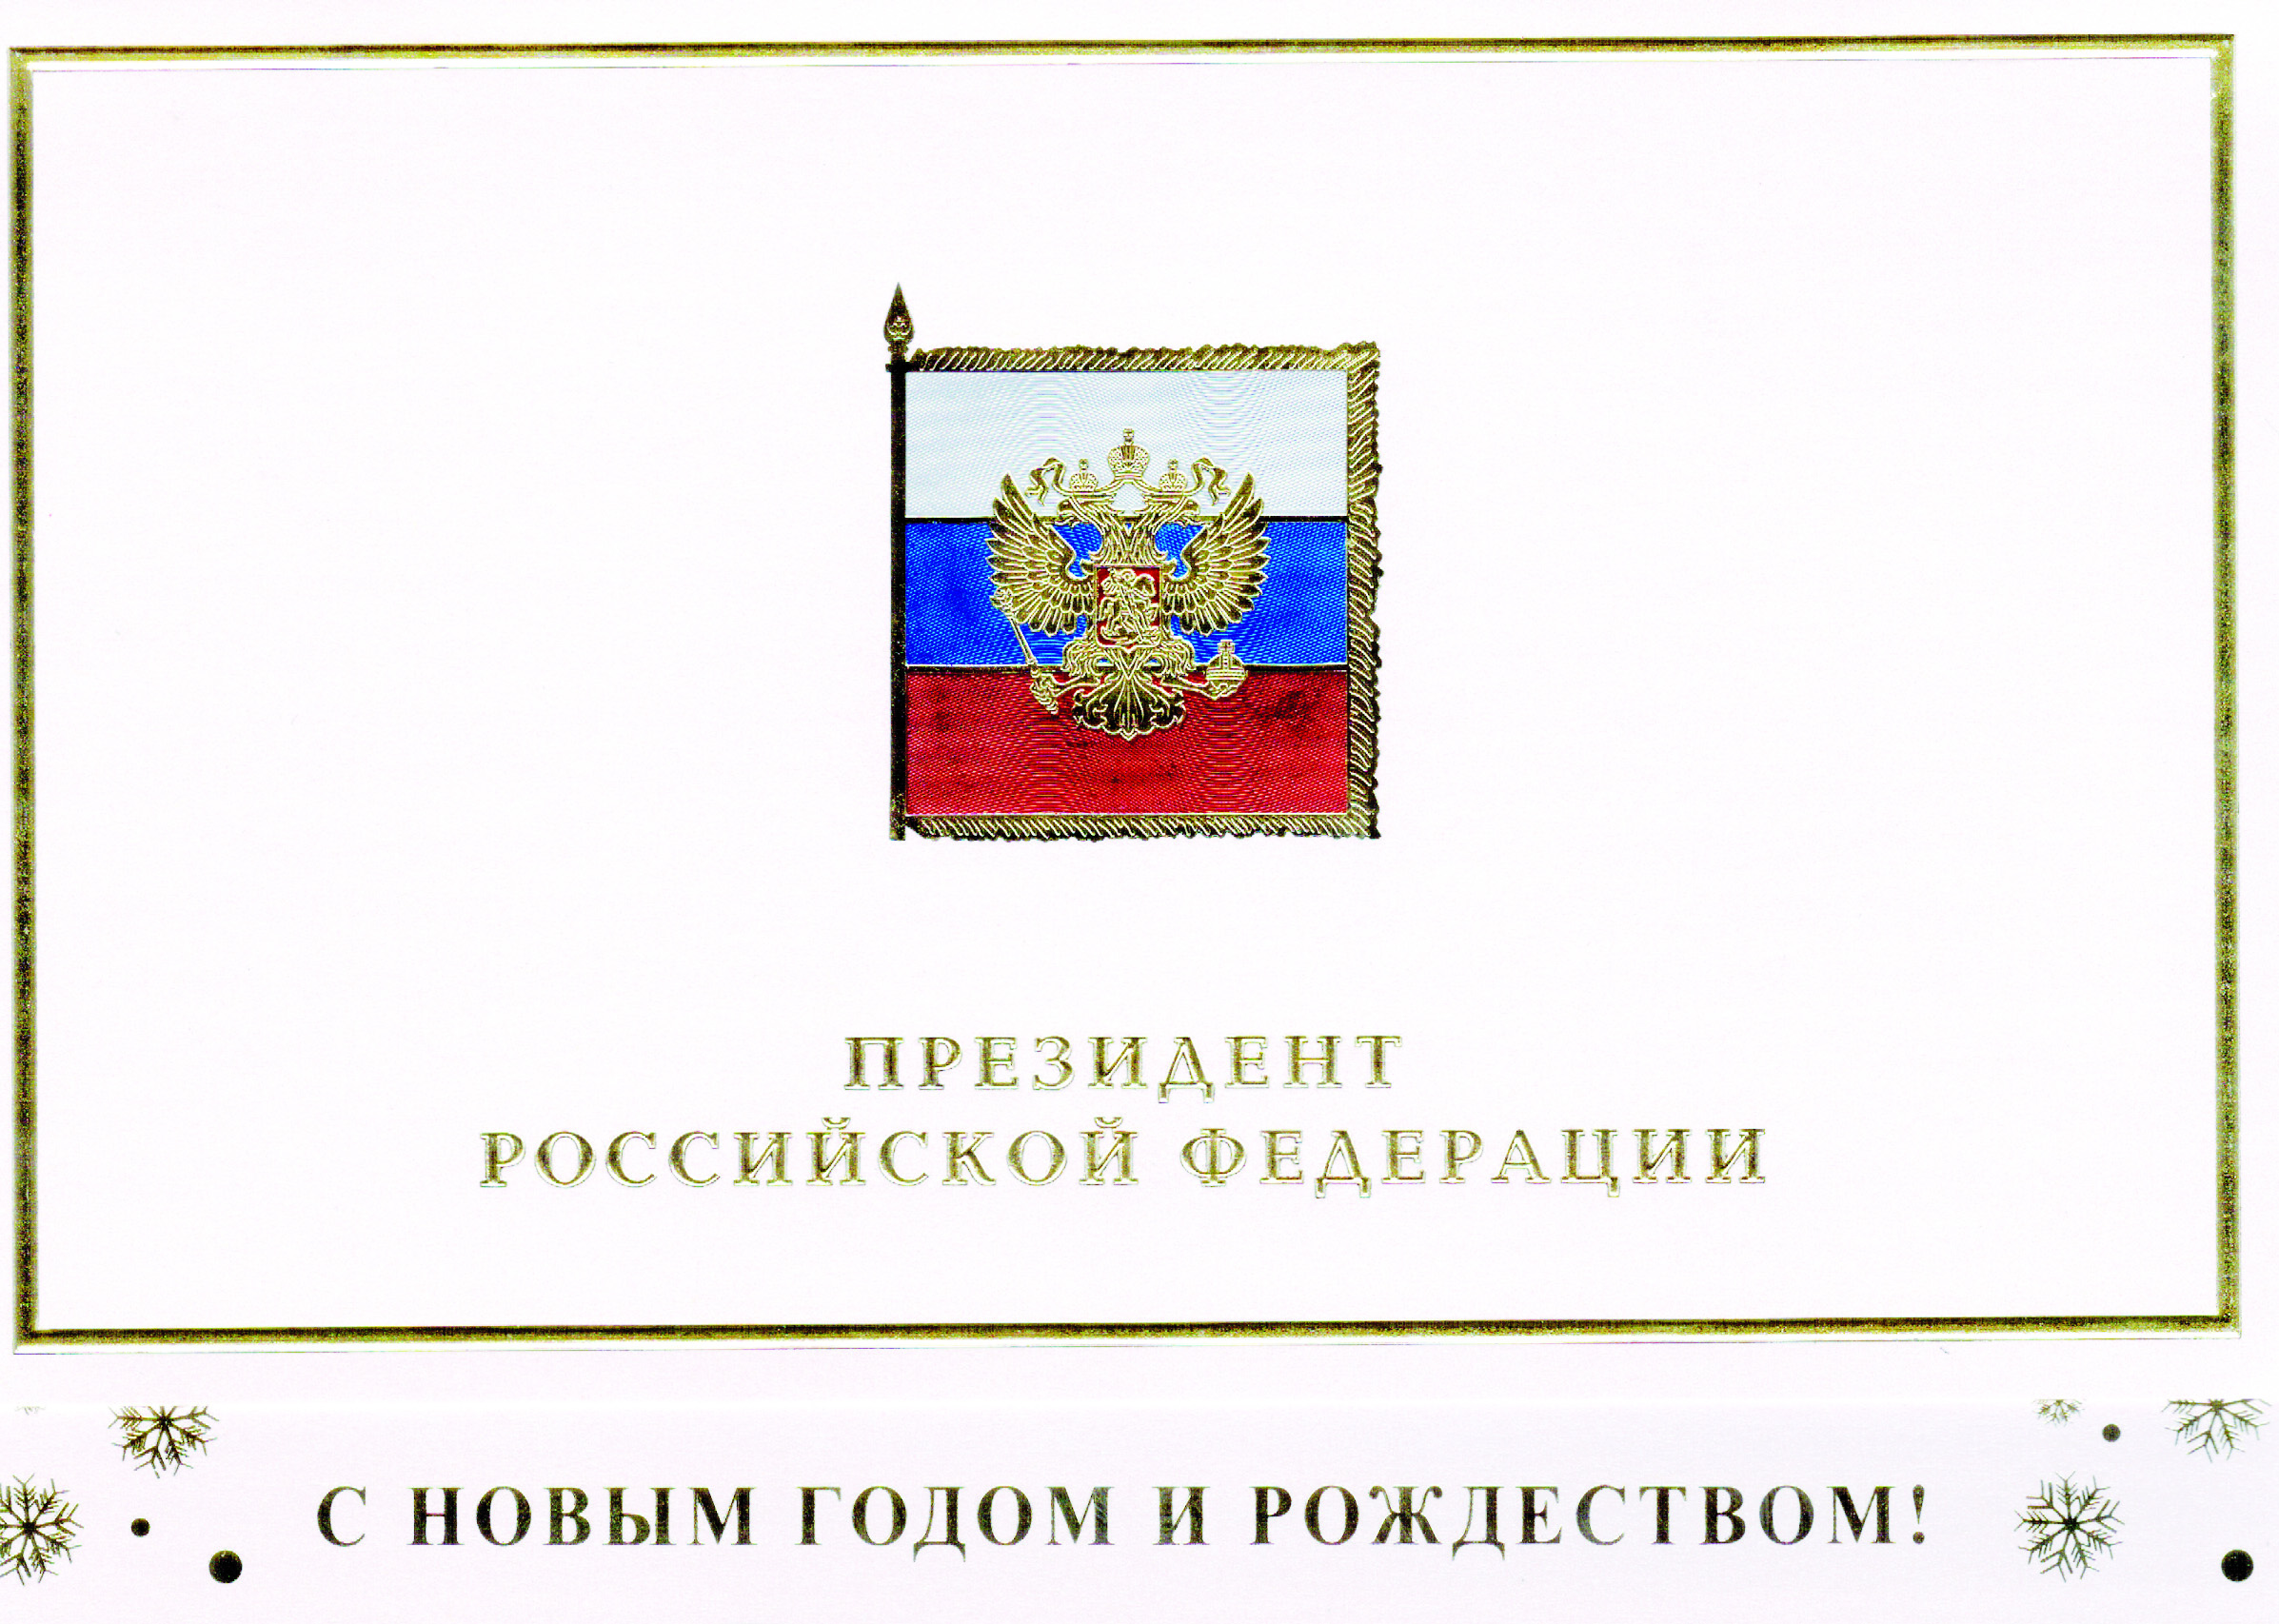 December 31, 2014 the President of the Russian Federation Vladimir Putin sent a letter of congratulations on the occasion of the New Year and Christmas to the Chairman of the Executive Board of the National Delphic Council of Russia Vladimir Ponyavin